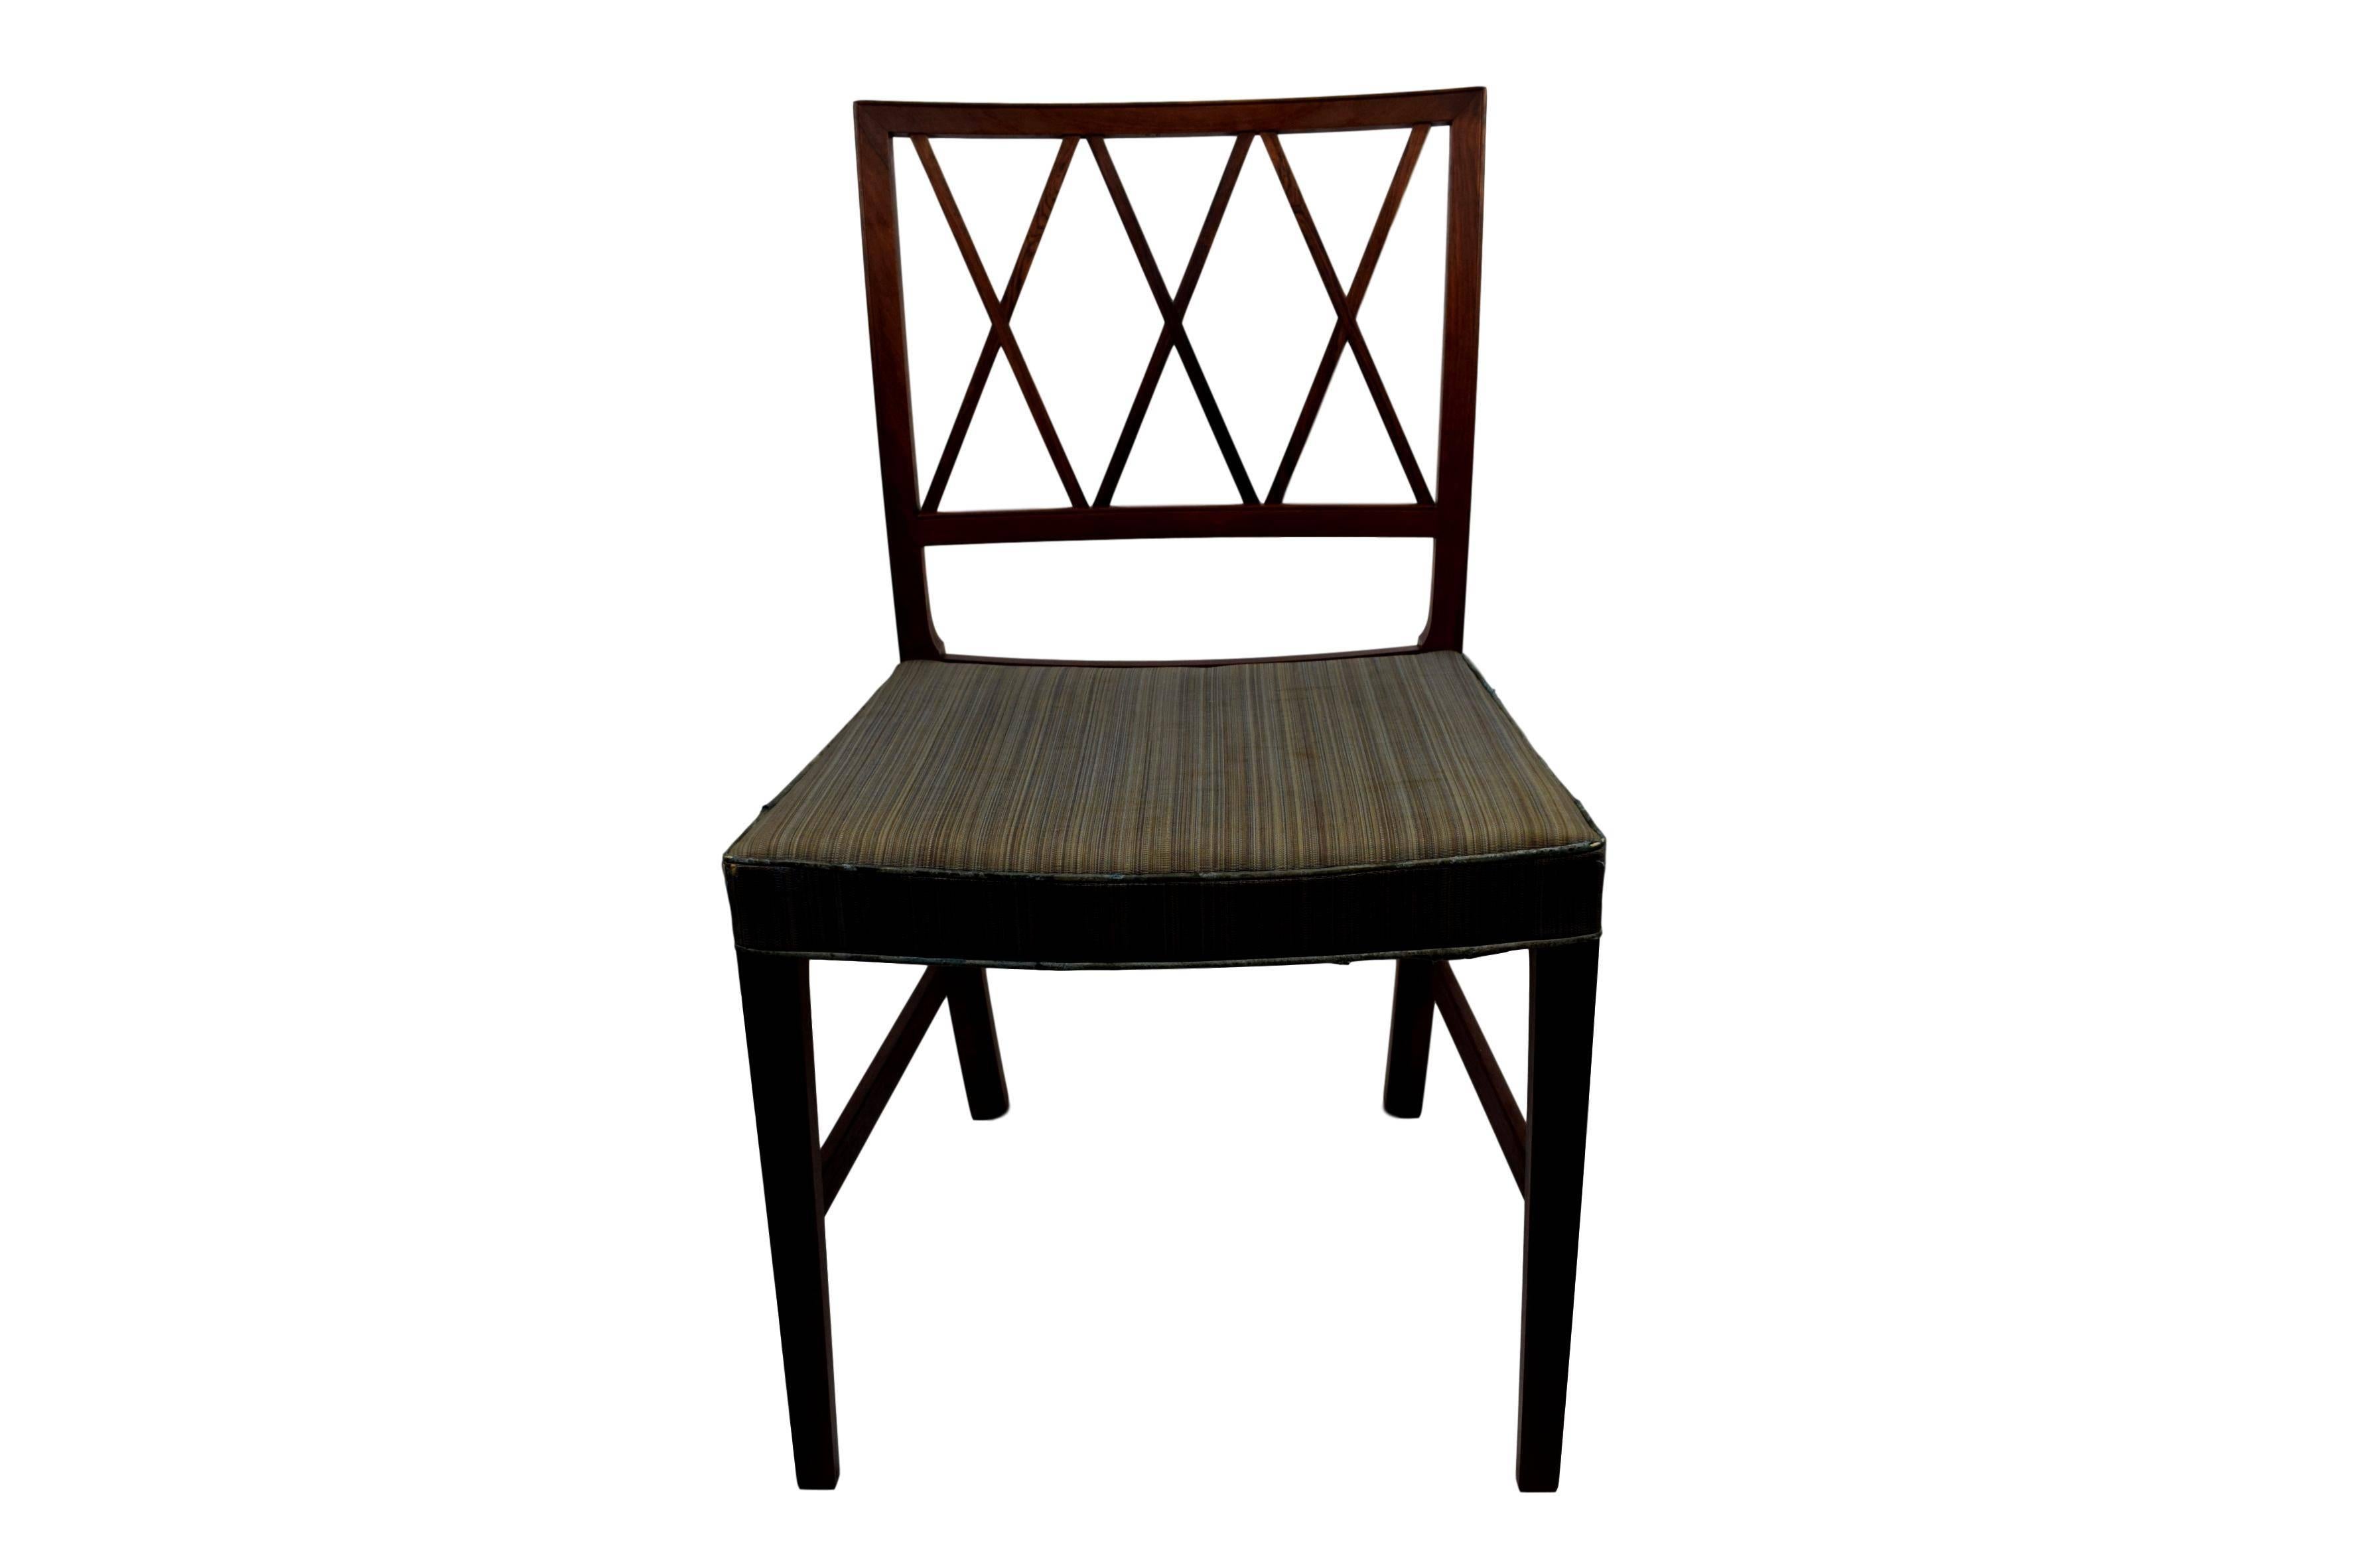 Scandinavian Modern Three Early Midcentury Rosewood Dining Chairs by Ole Wanscher, A.J. Iversen